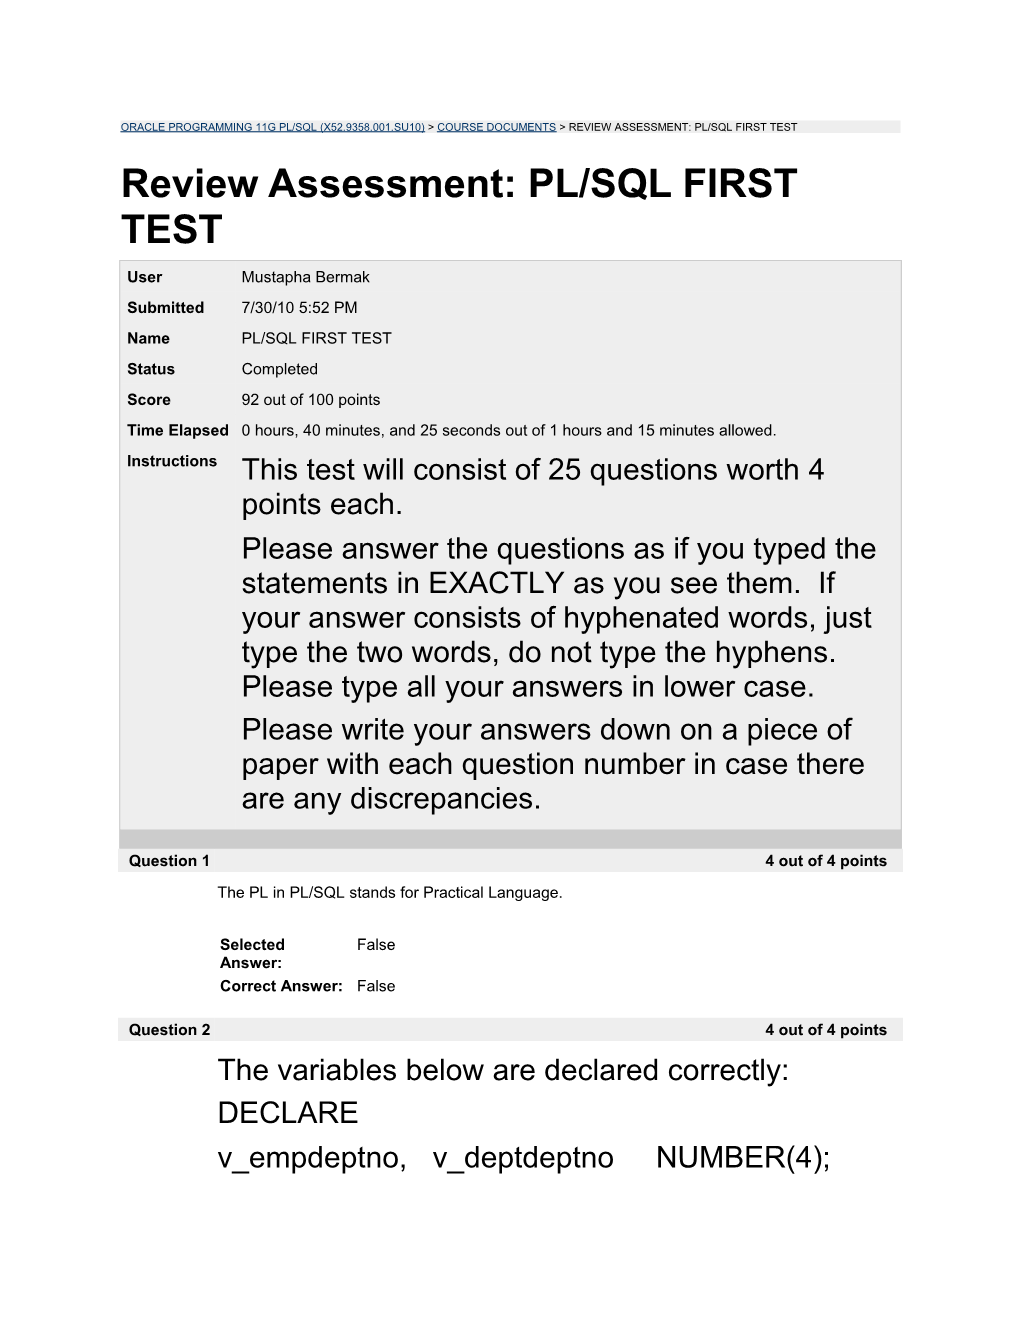 Review Assessment: PL/SQL FIRST TEST